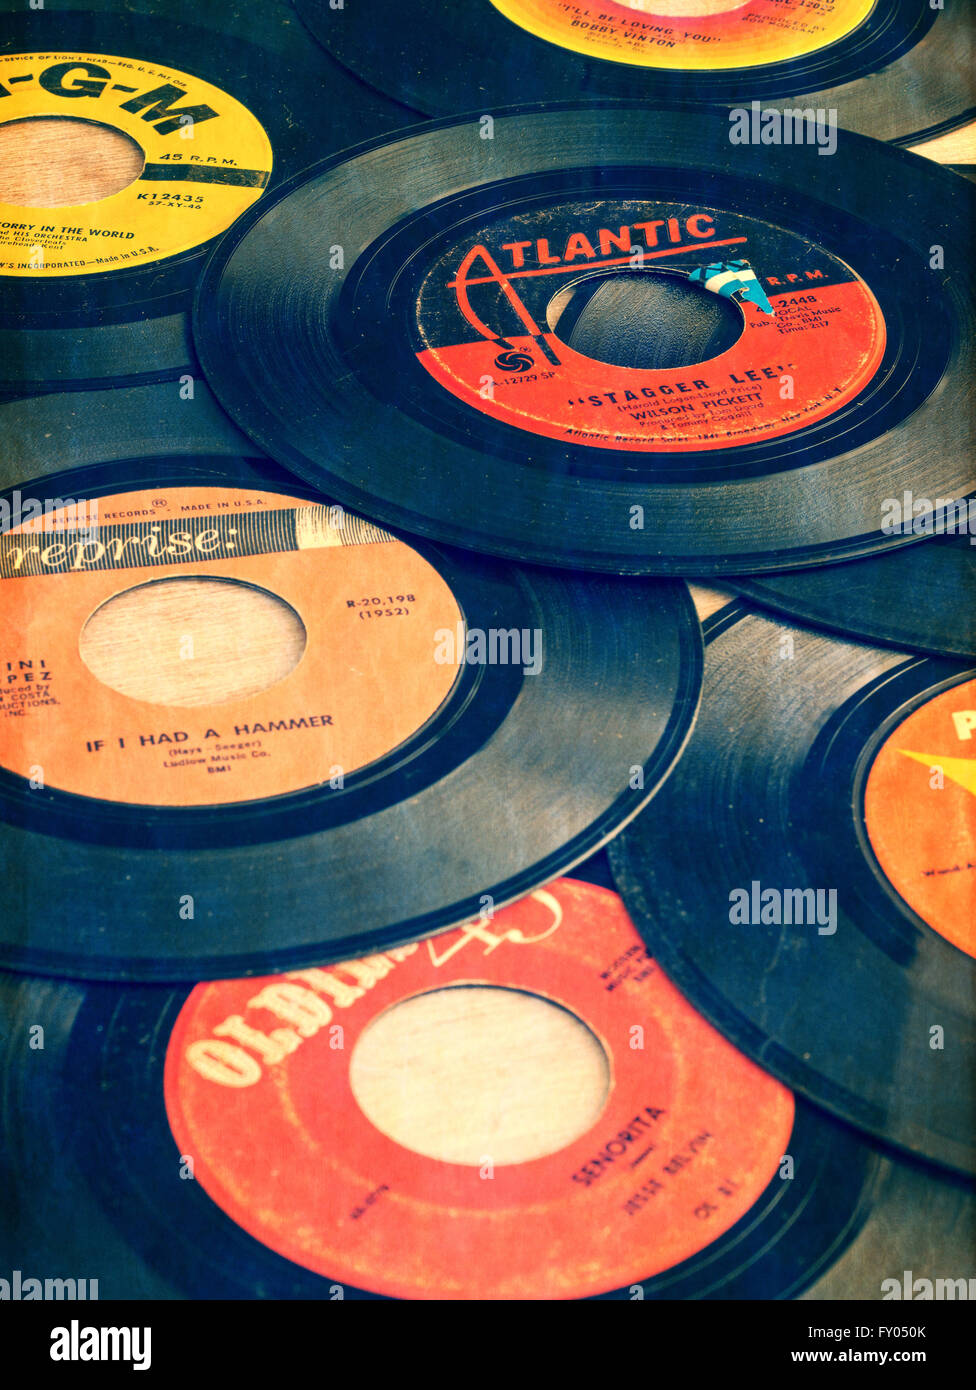 Old vinyl 45s from the early days of Rock and Roll music. Stock Photo